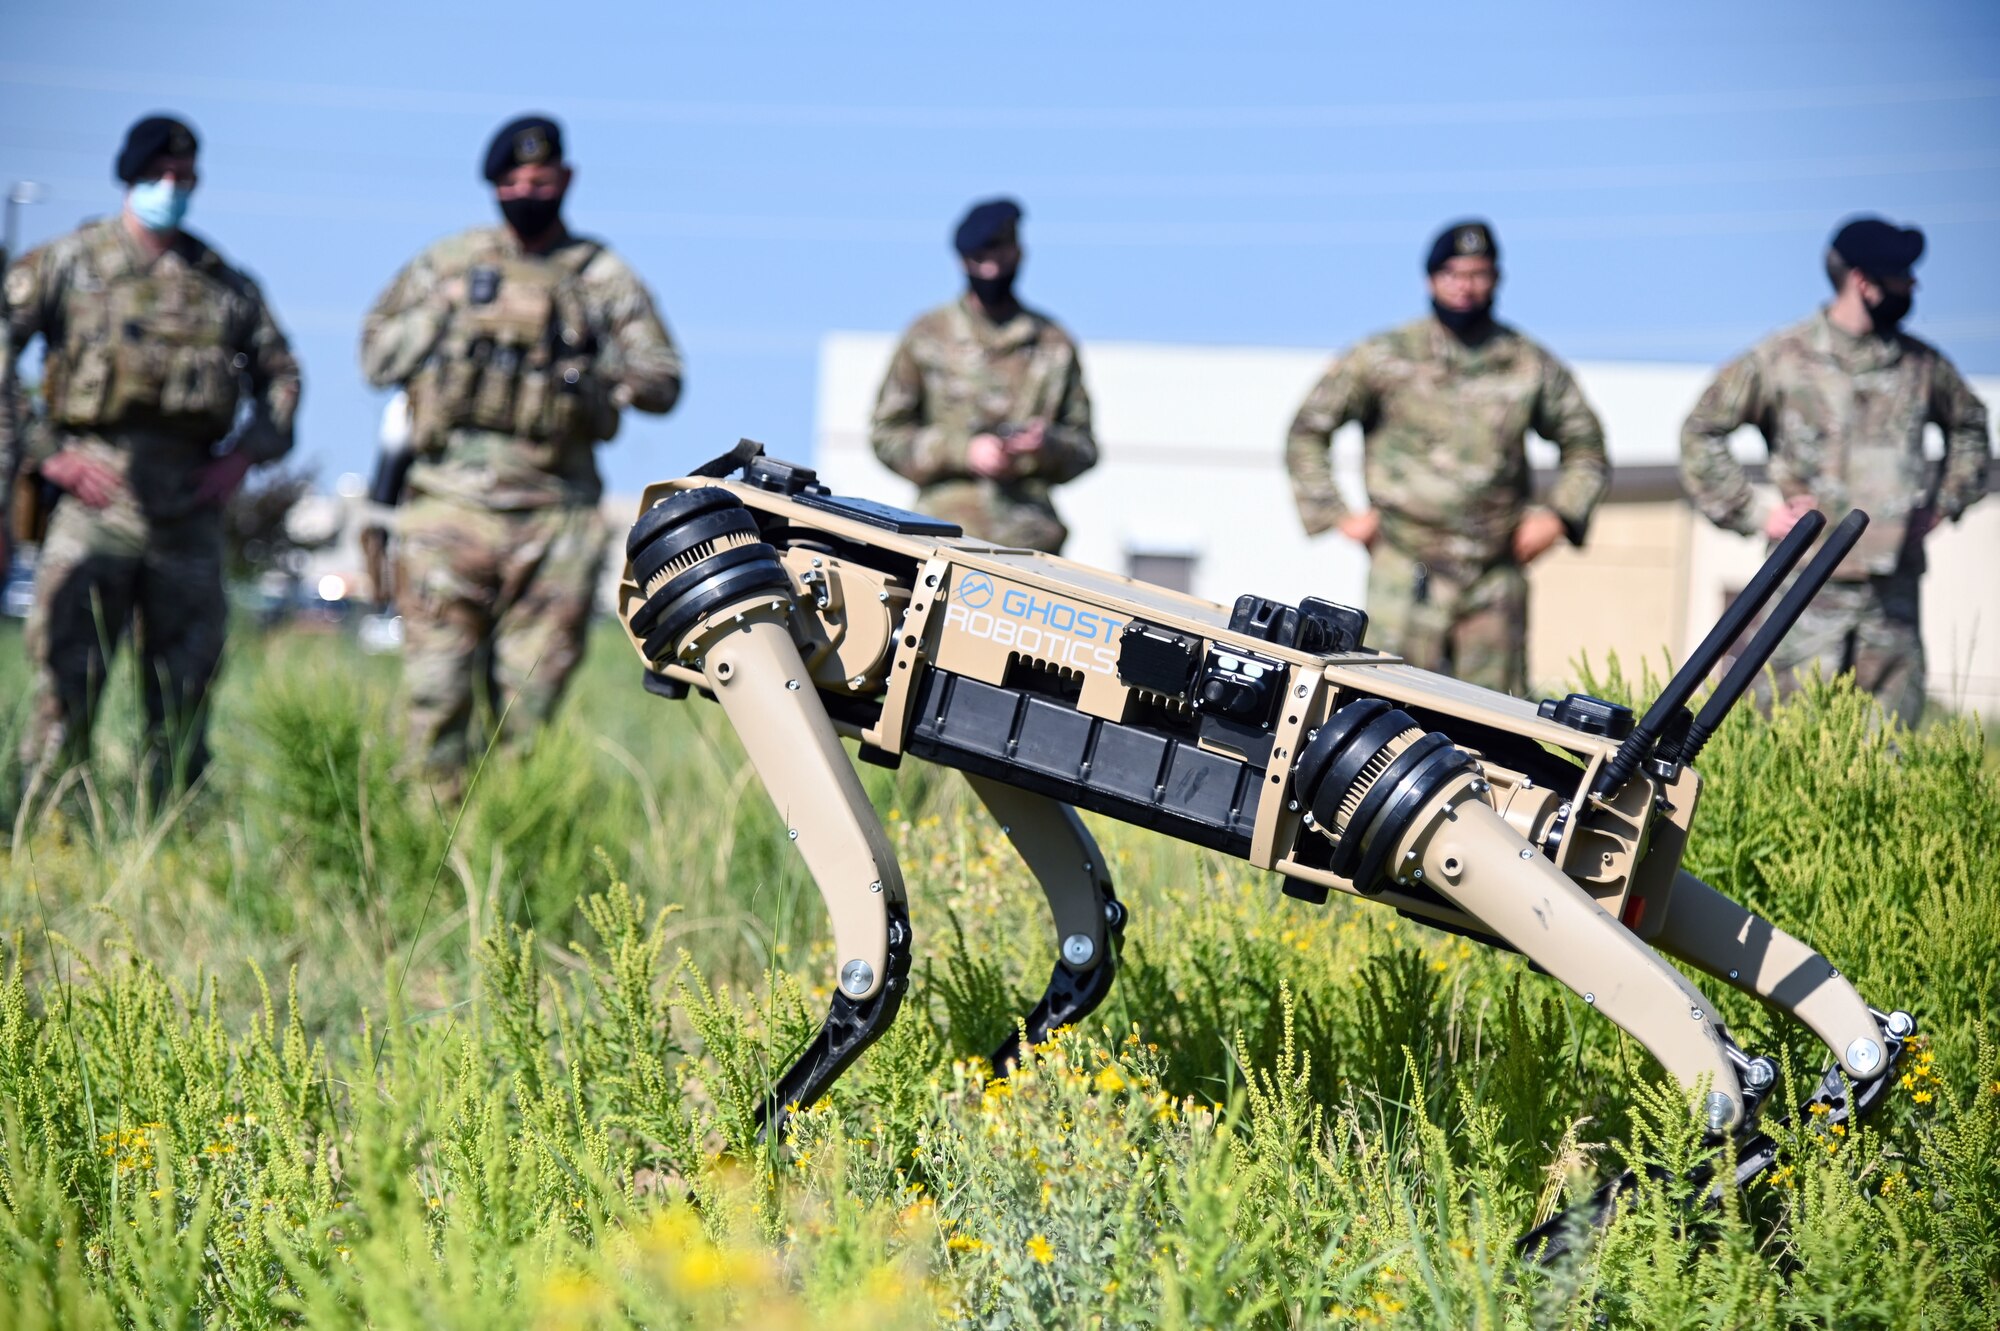 Airmen from the 75th Security Forces Squadron observe a demonstration of a Quad-legged Unmanned Ground Vehicle